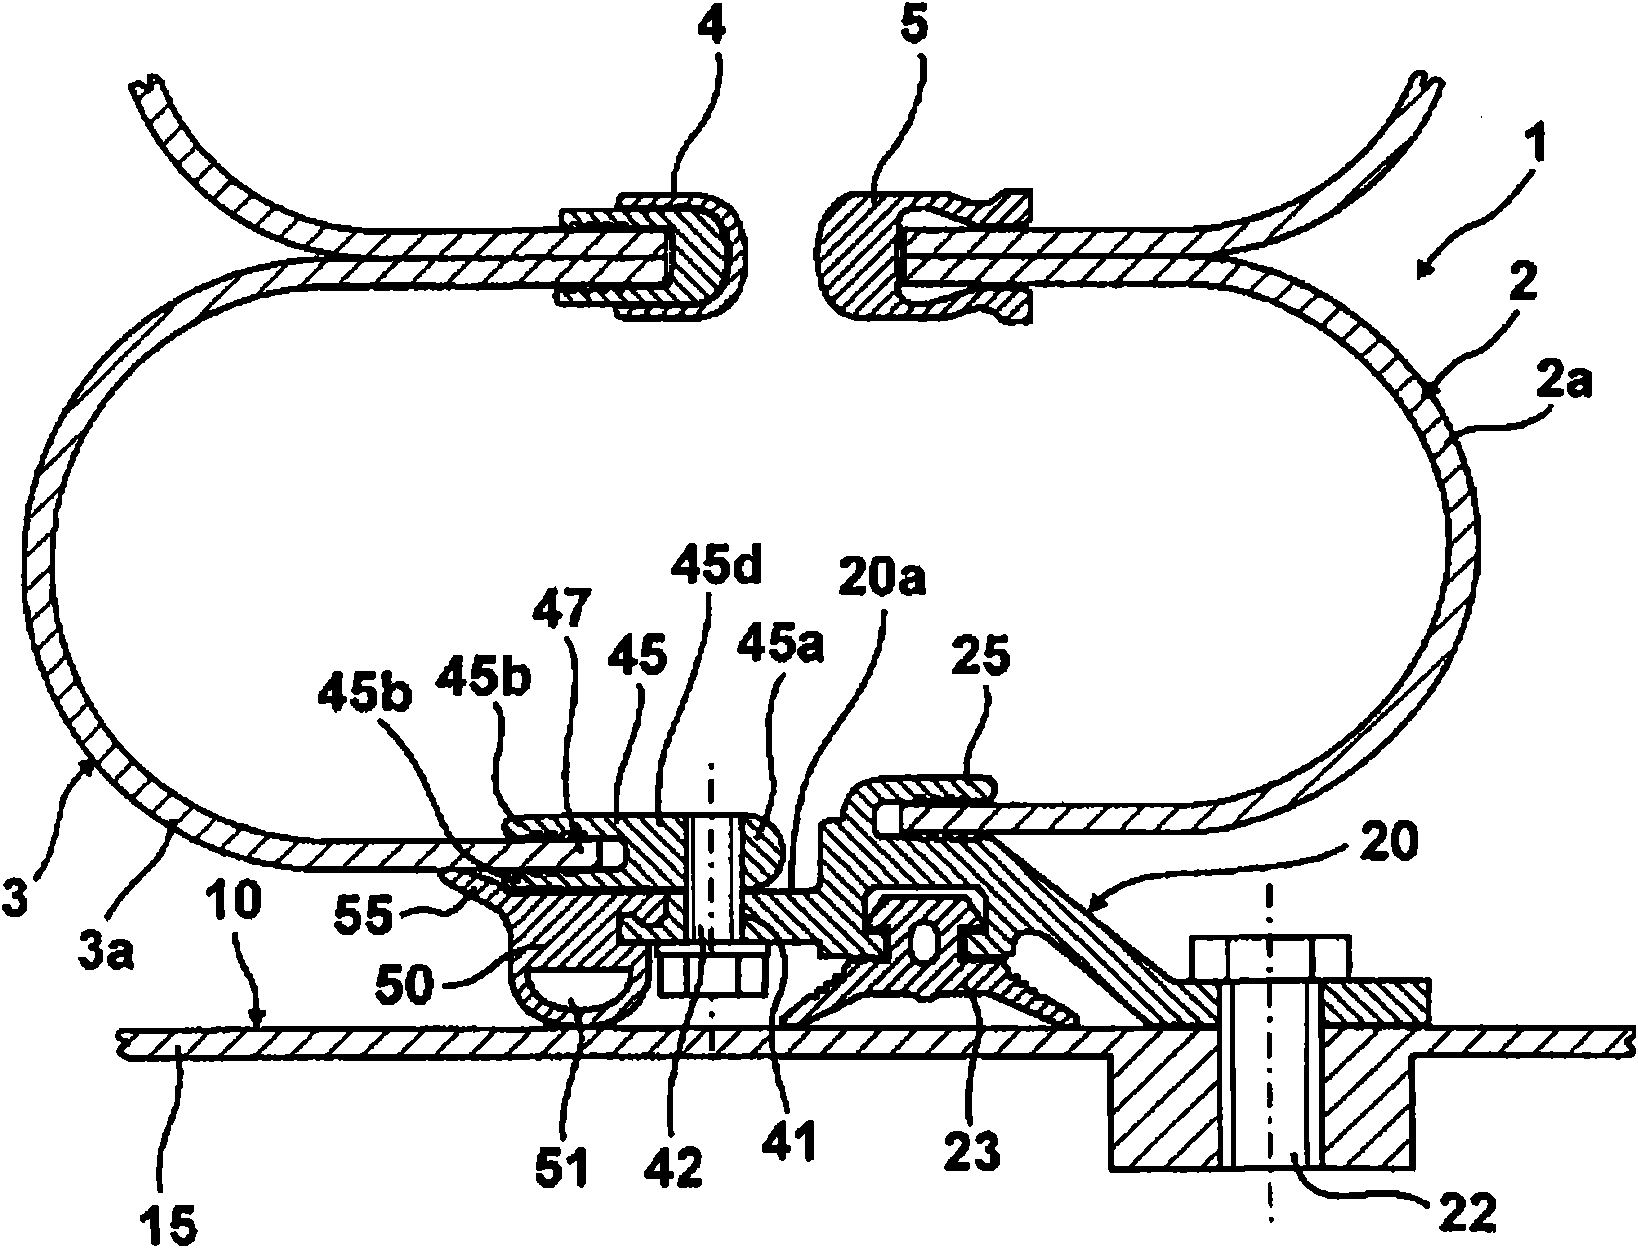 Double bellow gaiter comprising two gaiter elements for the intersection of two vehicles with a jointed connection